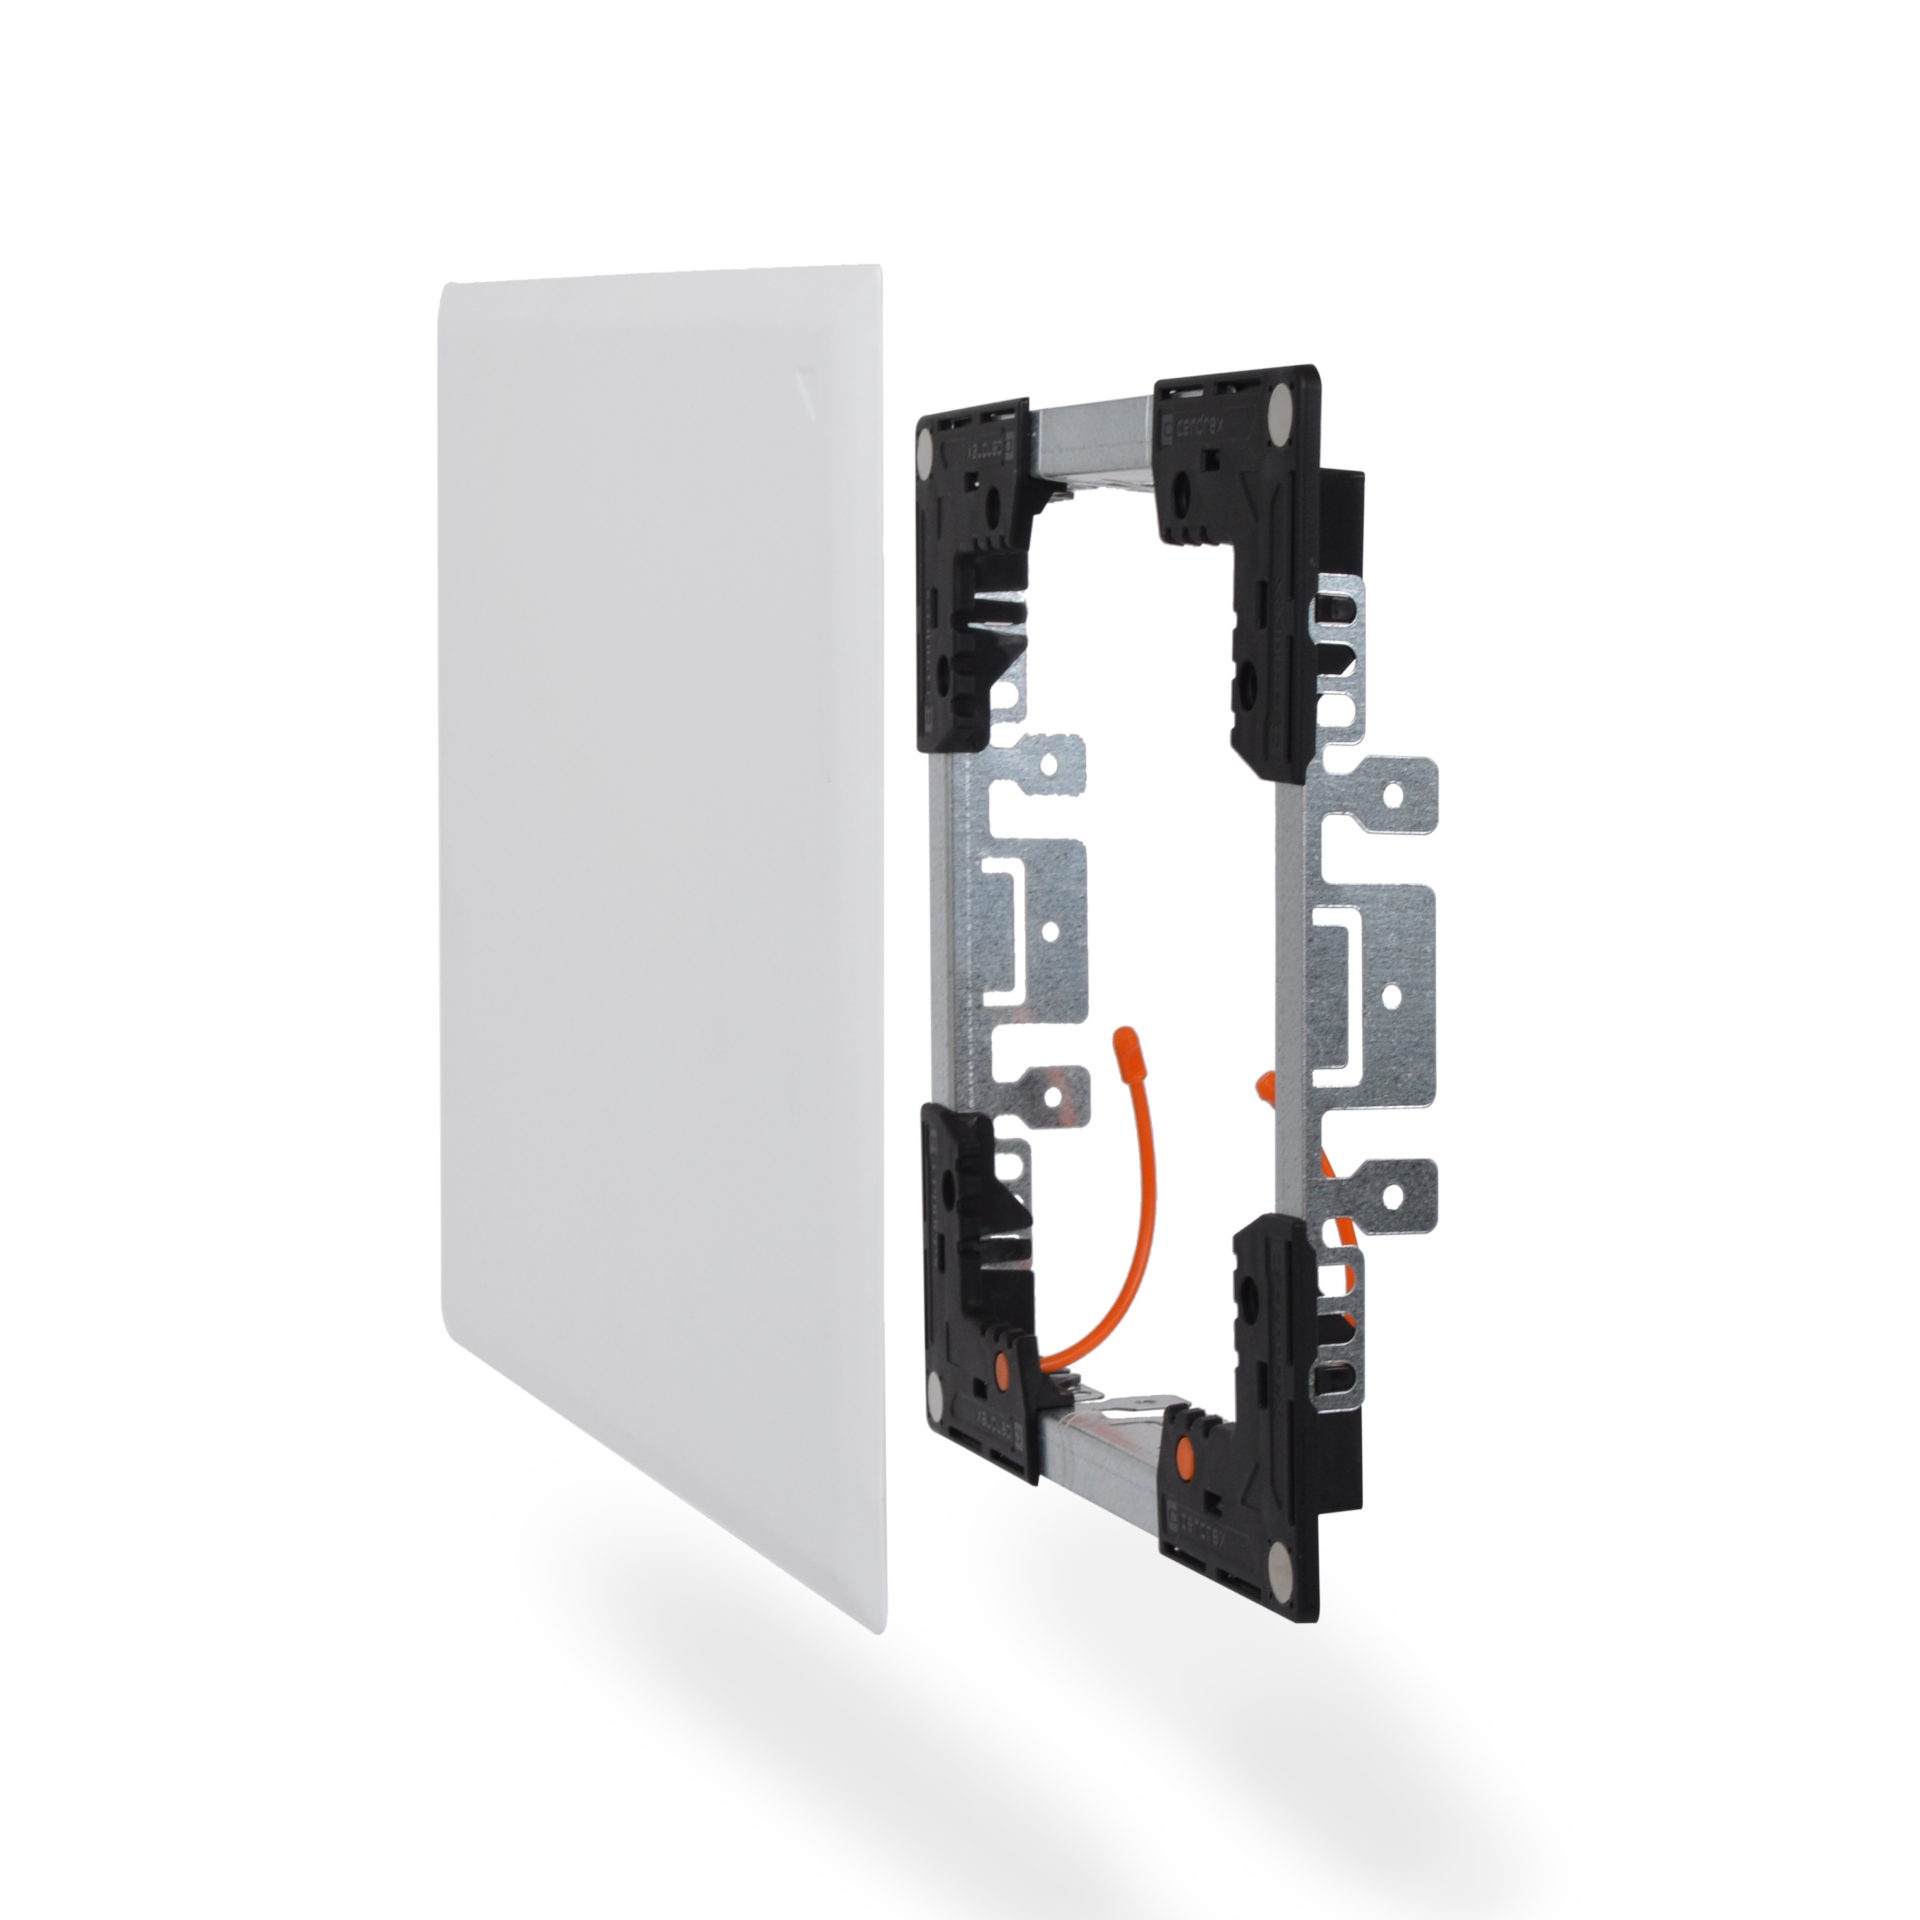 FLE-00- FLEXISNAP - Flush Universal Access Door with Adjustable Frame and Magnetic Closing. Concealed magnets. No hinge. Security cables